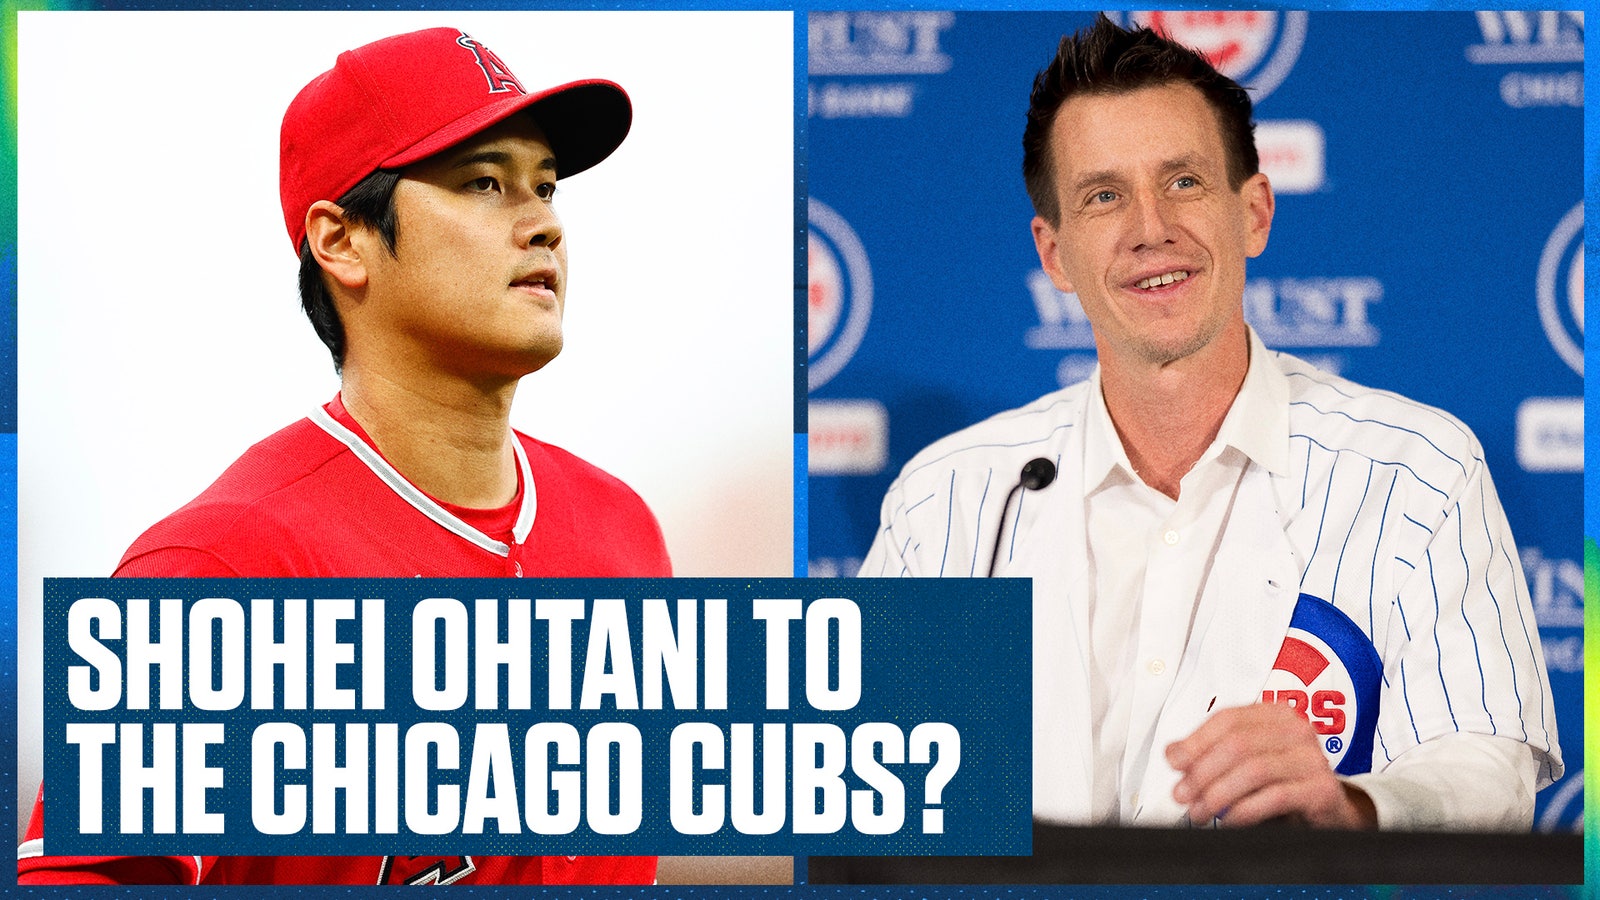 This Week In Shohei Ohtani News: Will Ohtani end up a Chicago Cub?